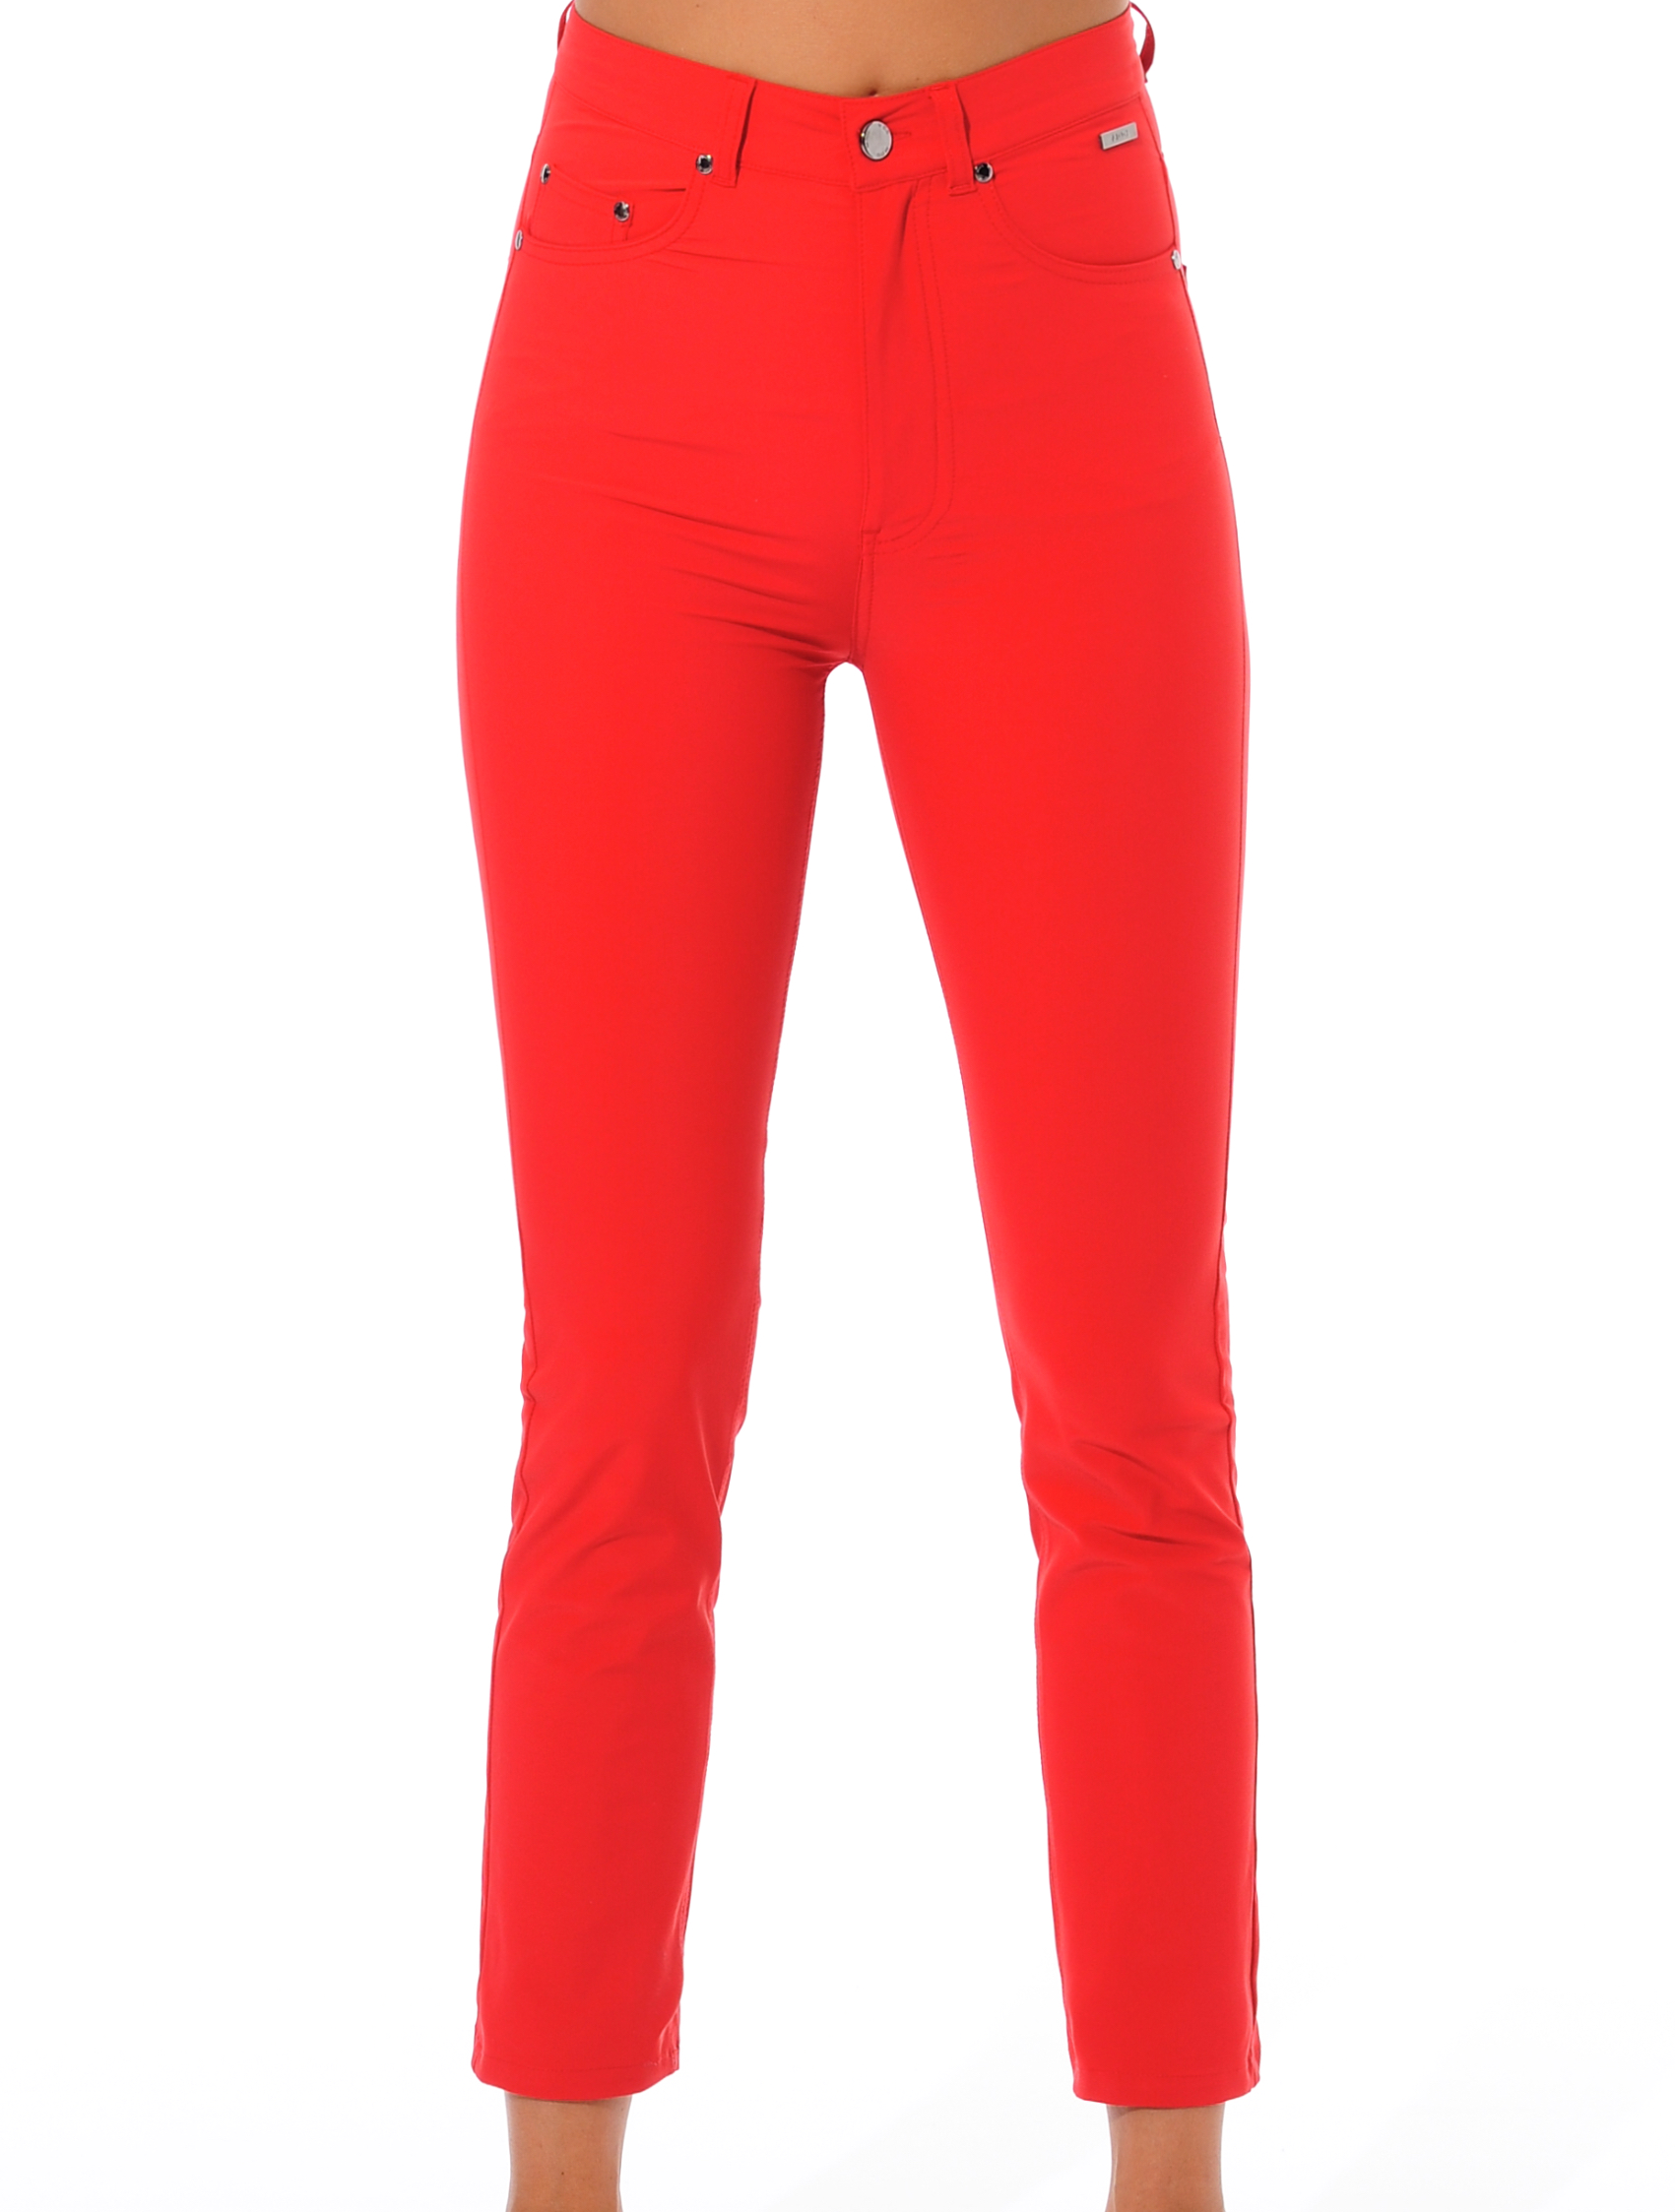 4way stretch high waist ankle pants red 